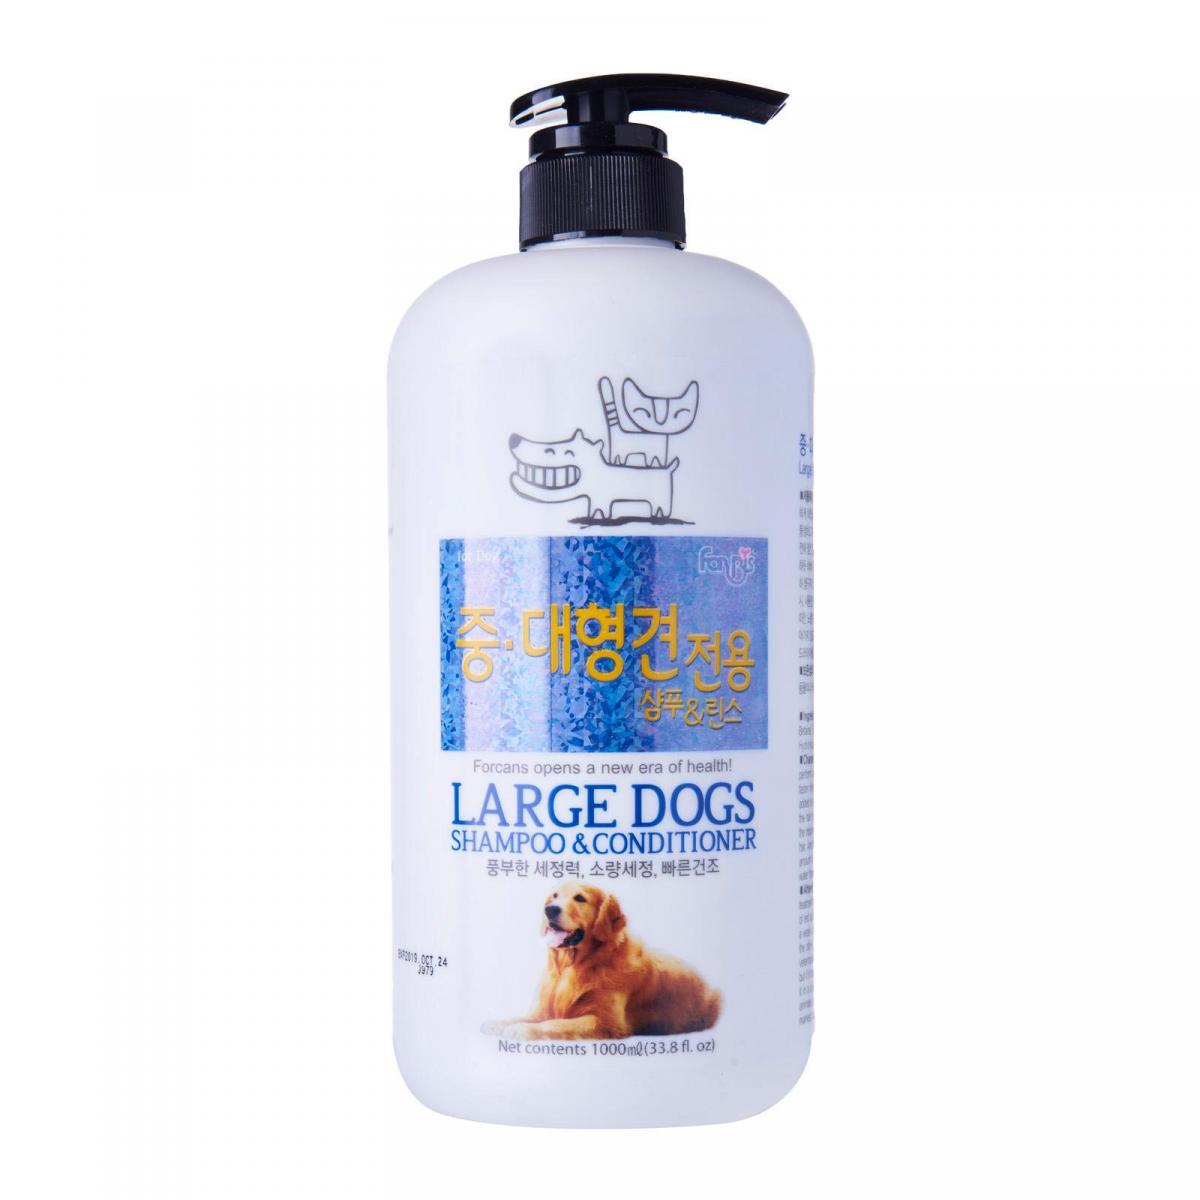 Large Dogs Shampoo & Conditioner (1000ml)